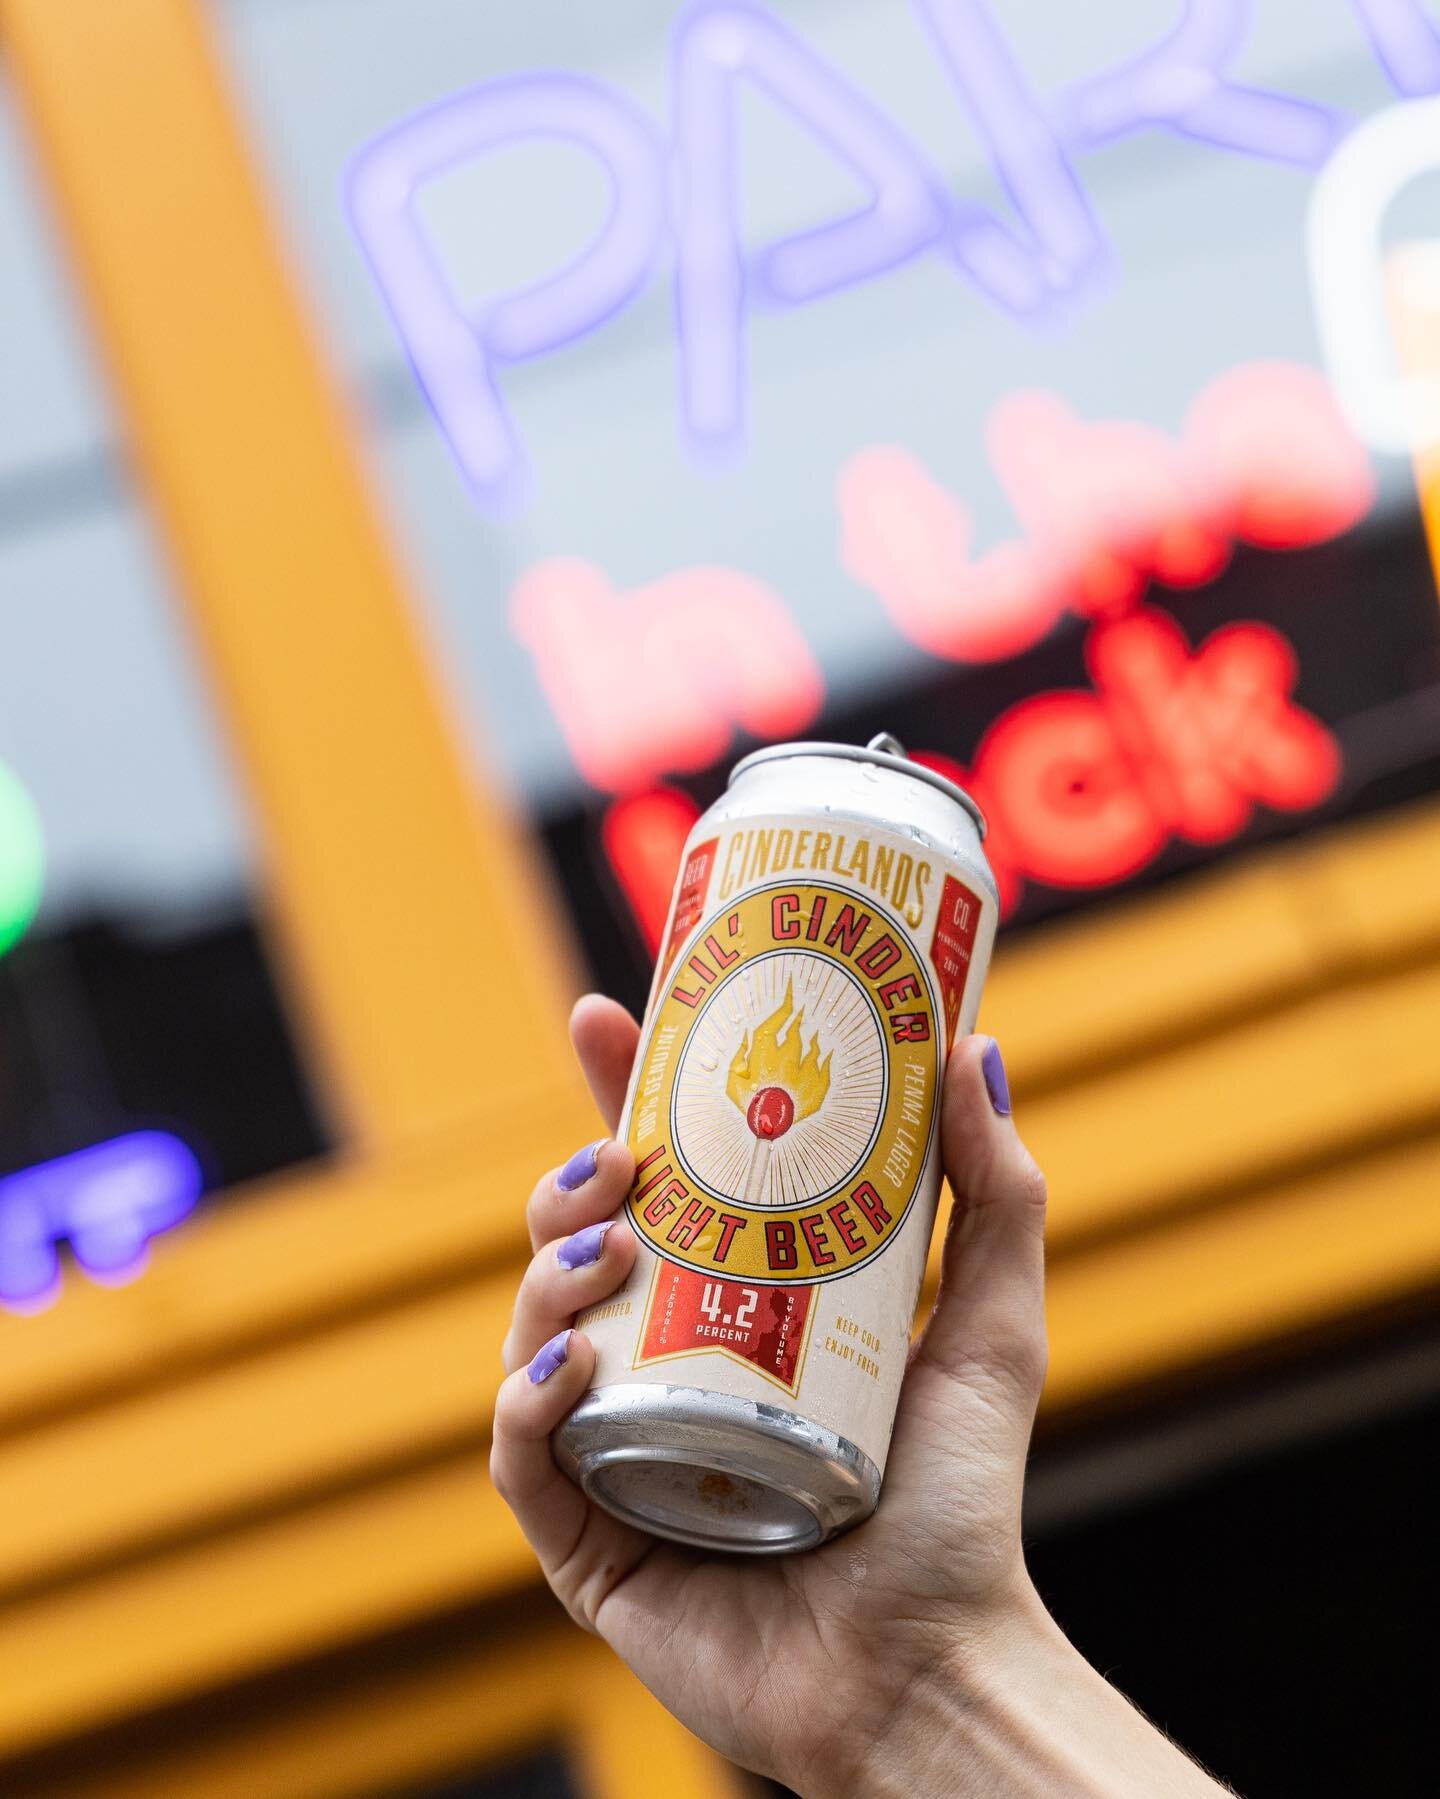 Long Story Short - Lil&rsquo; Cinders are good for any time of day or night, especially when they&rsquo;re only 3 bucks here at LSS.
.
.
.
. #longstoryshort #lss #lager #lilcinder #crispy #allday #allnight #goodvibes #partyintheback #light